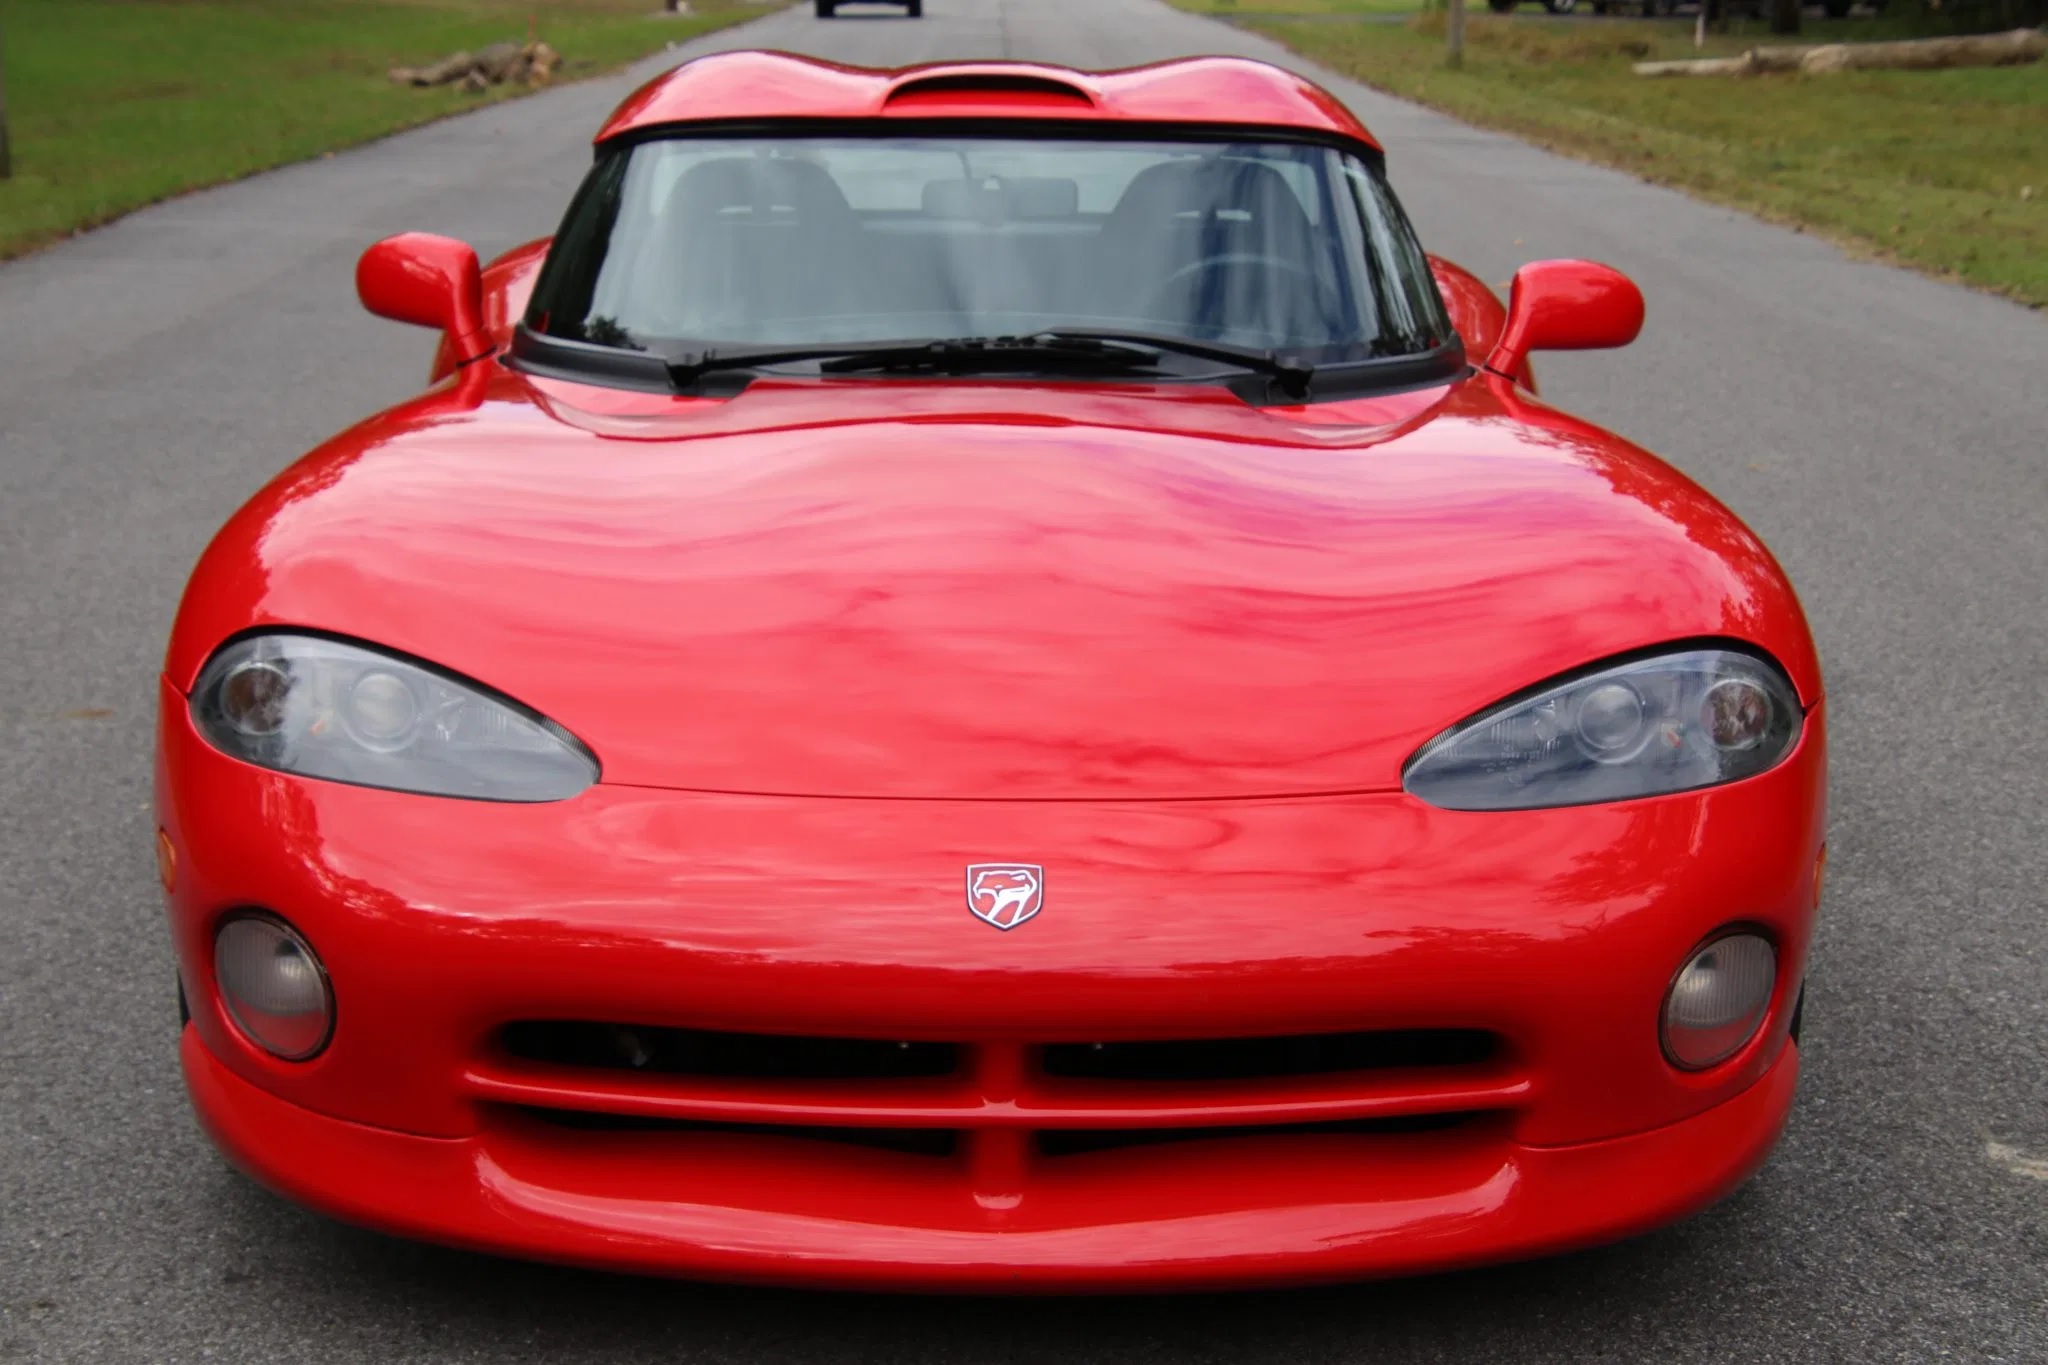 The front view of a red 1994 Dodge Viper RT/10 with a hardtop